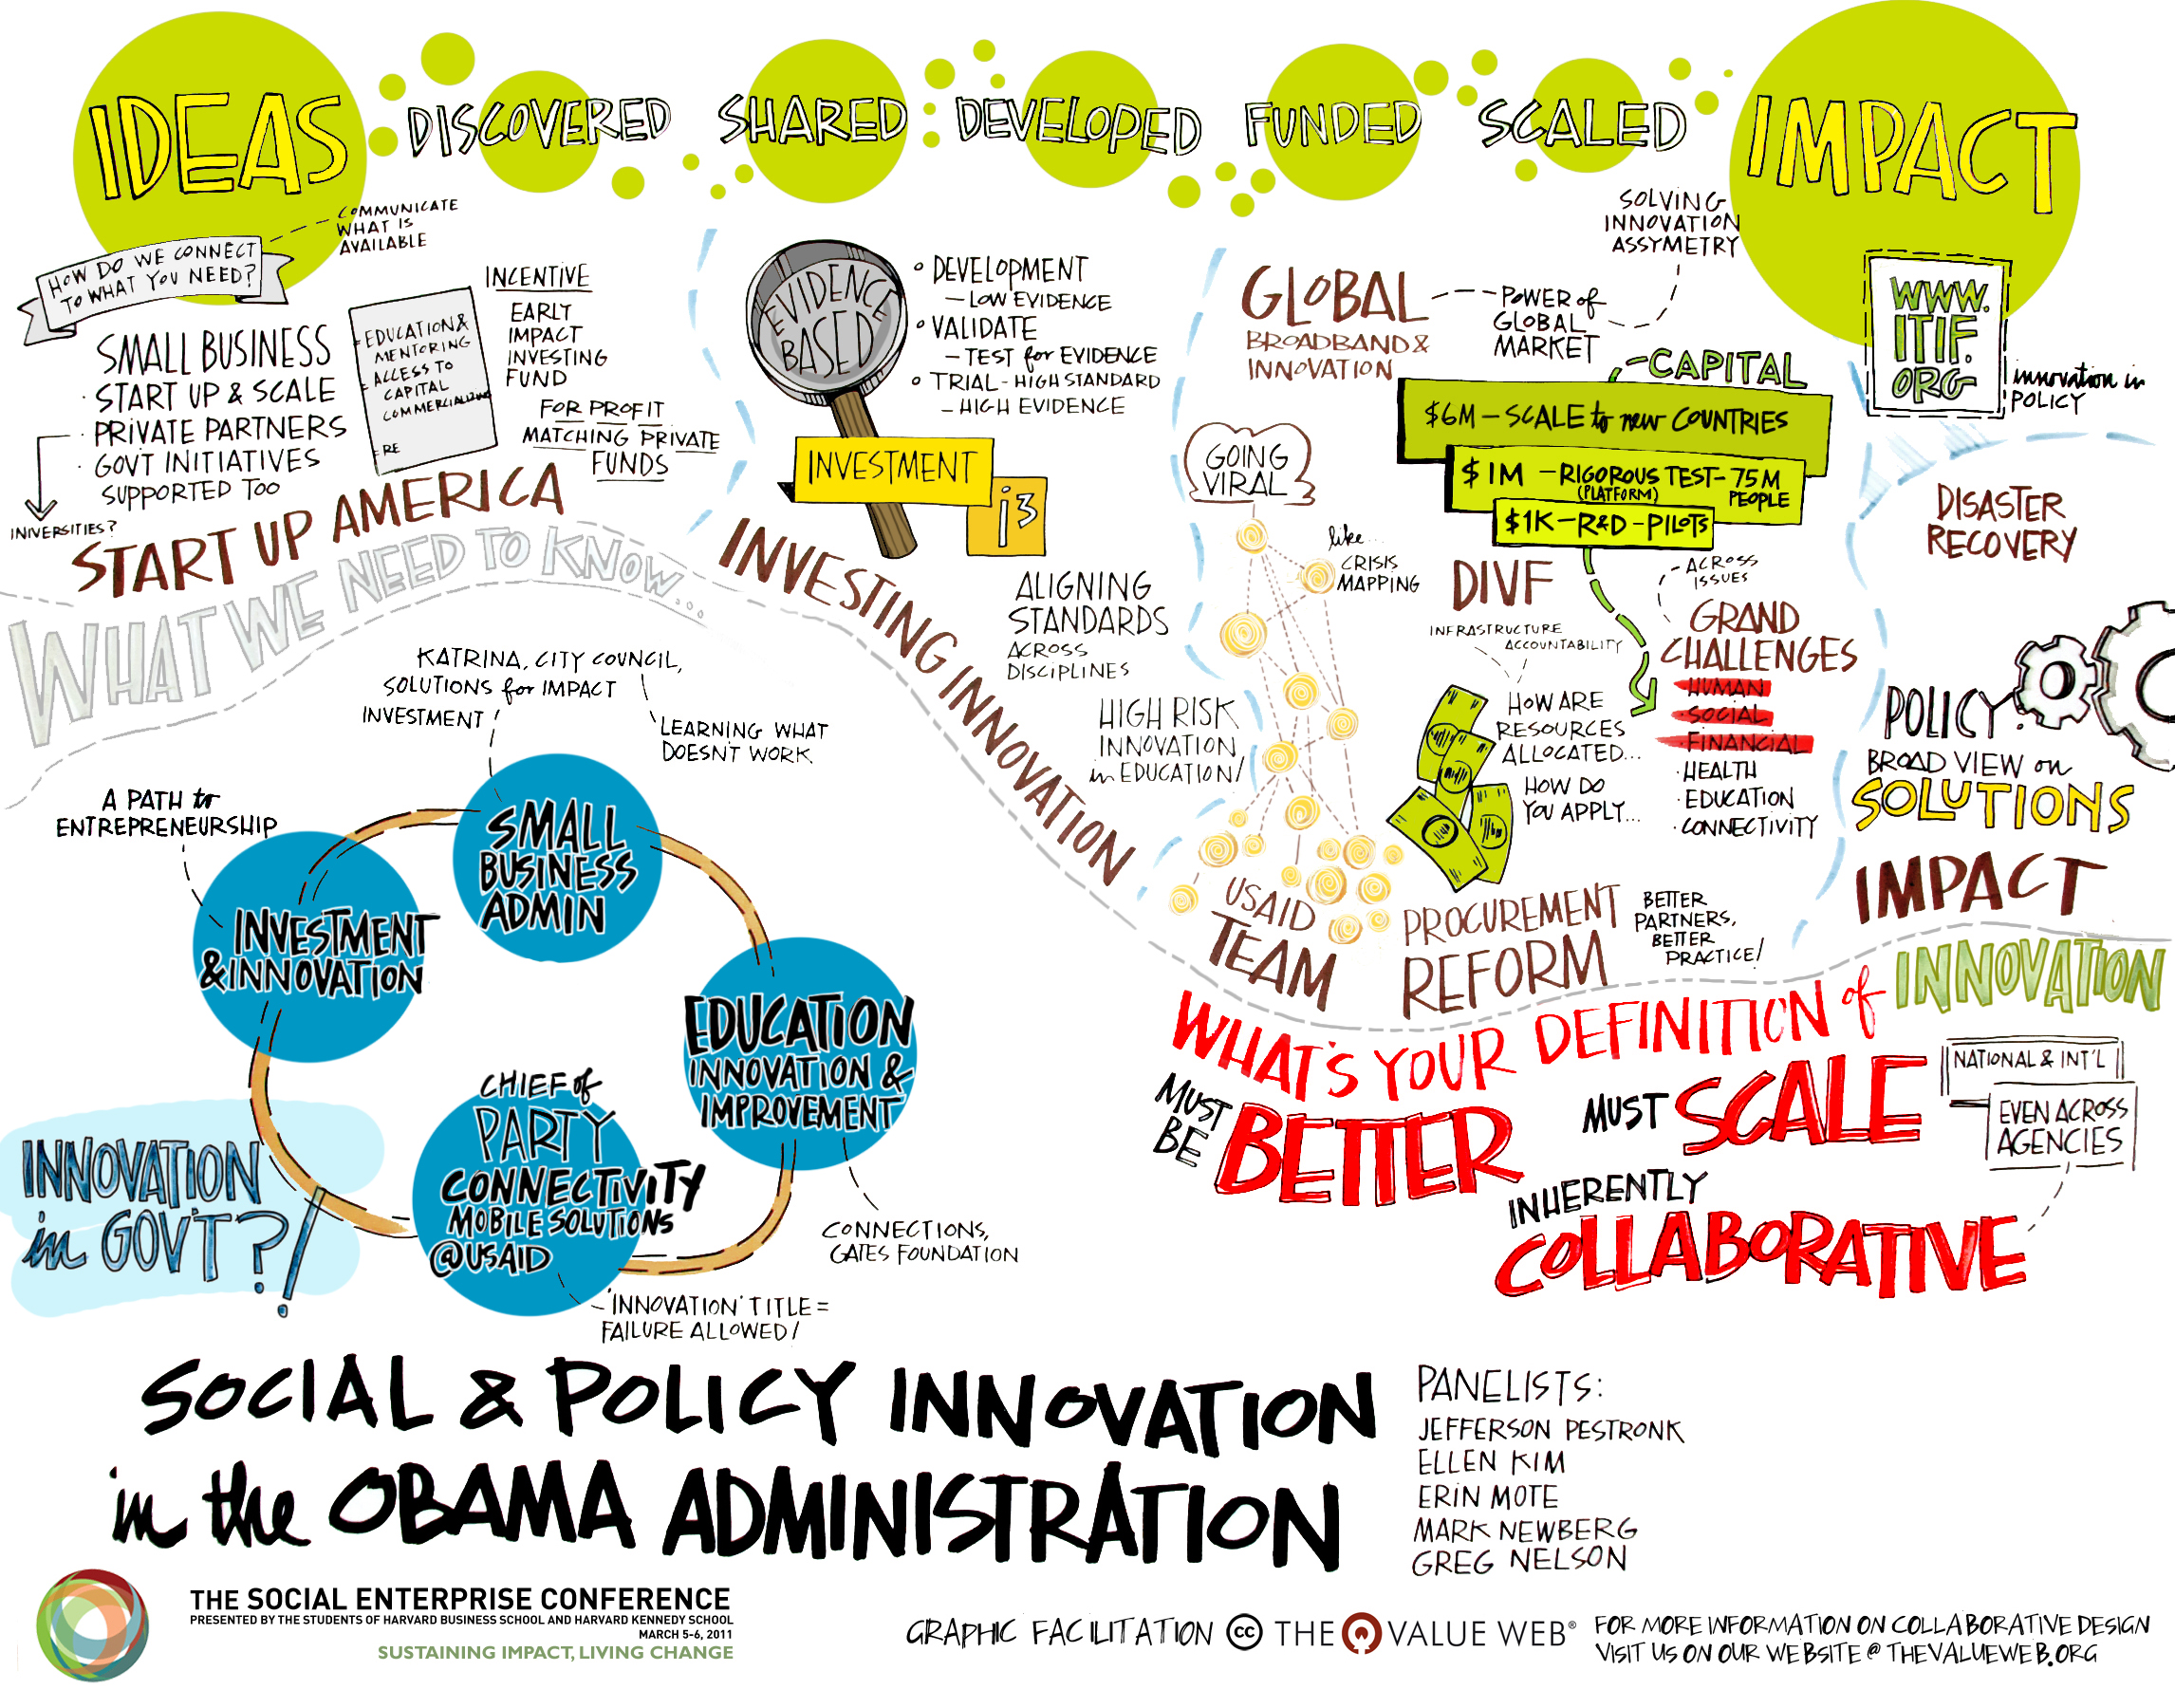 Social & Policy Innovation in the Obama Admin 1o2